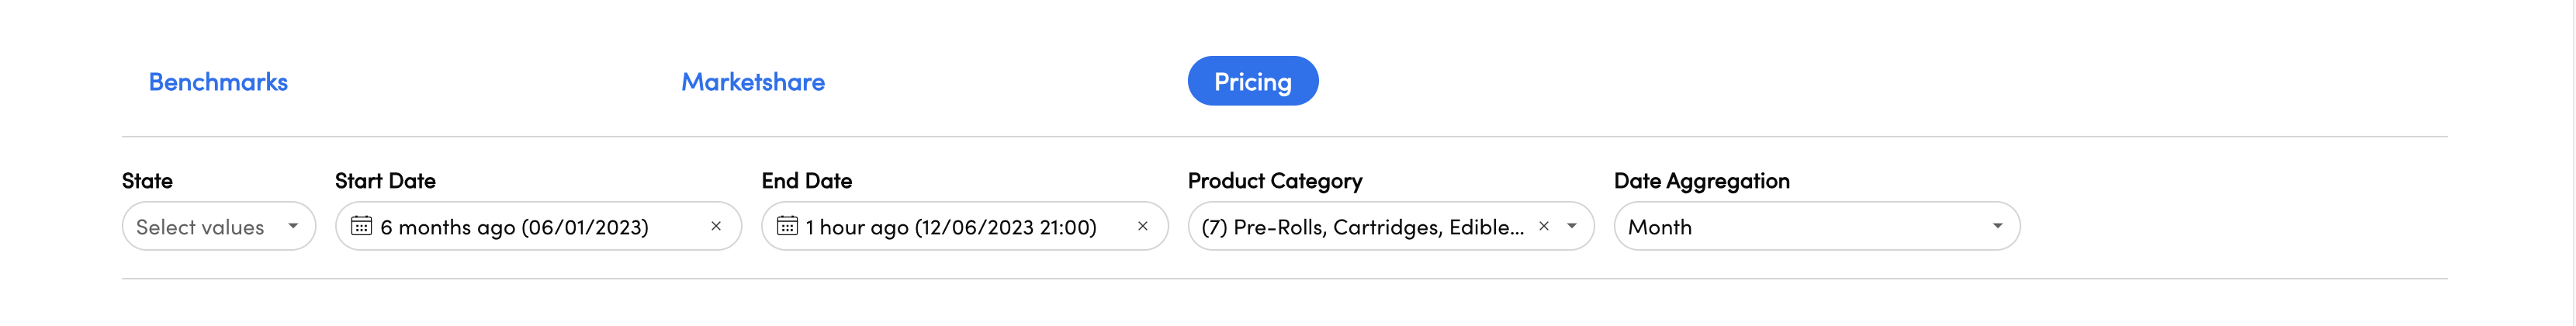 Market Insights Pricing Filters.png